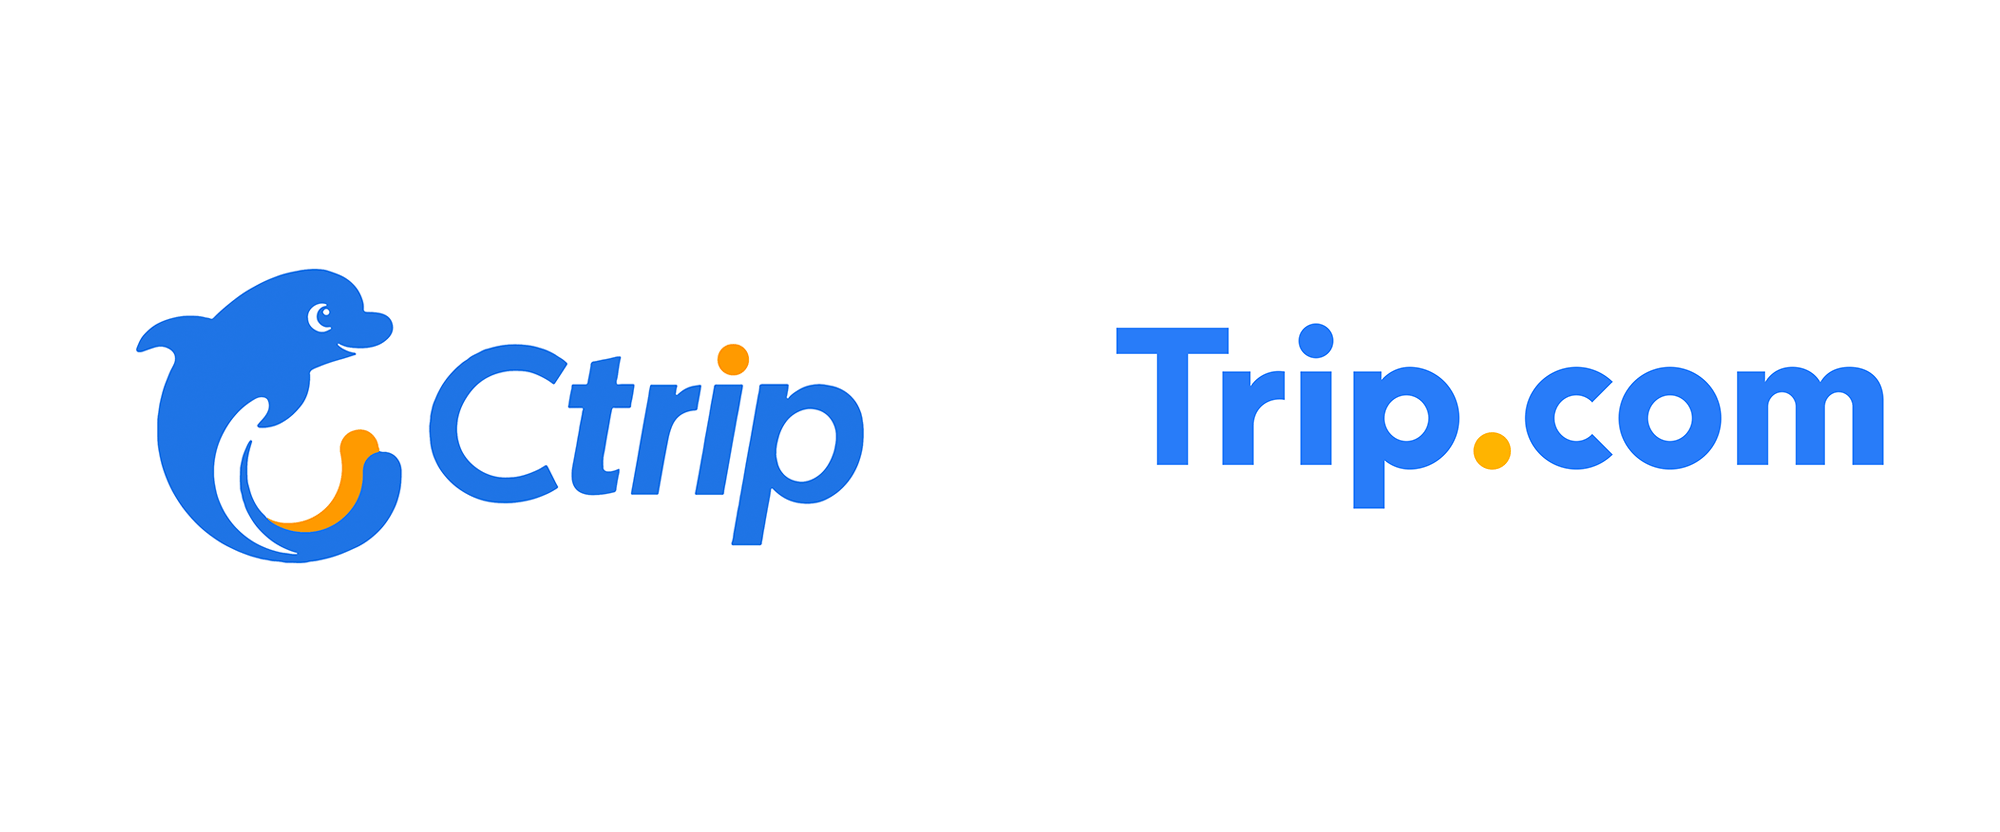 New Logo and Identity for Trip.com done In-house